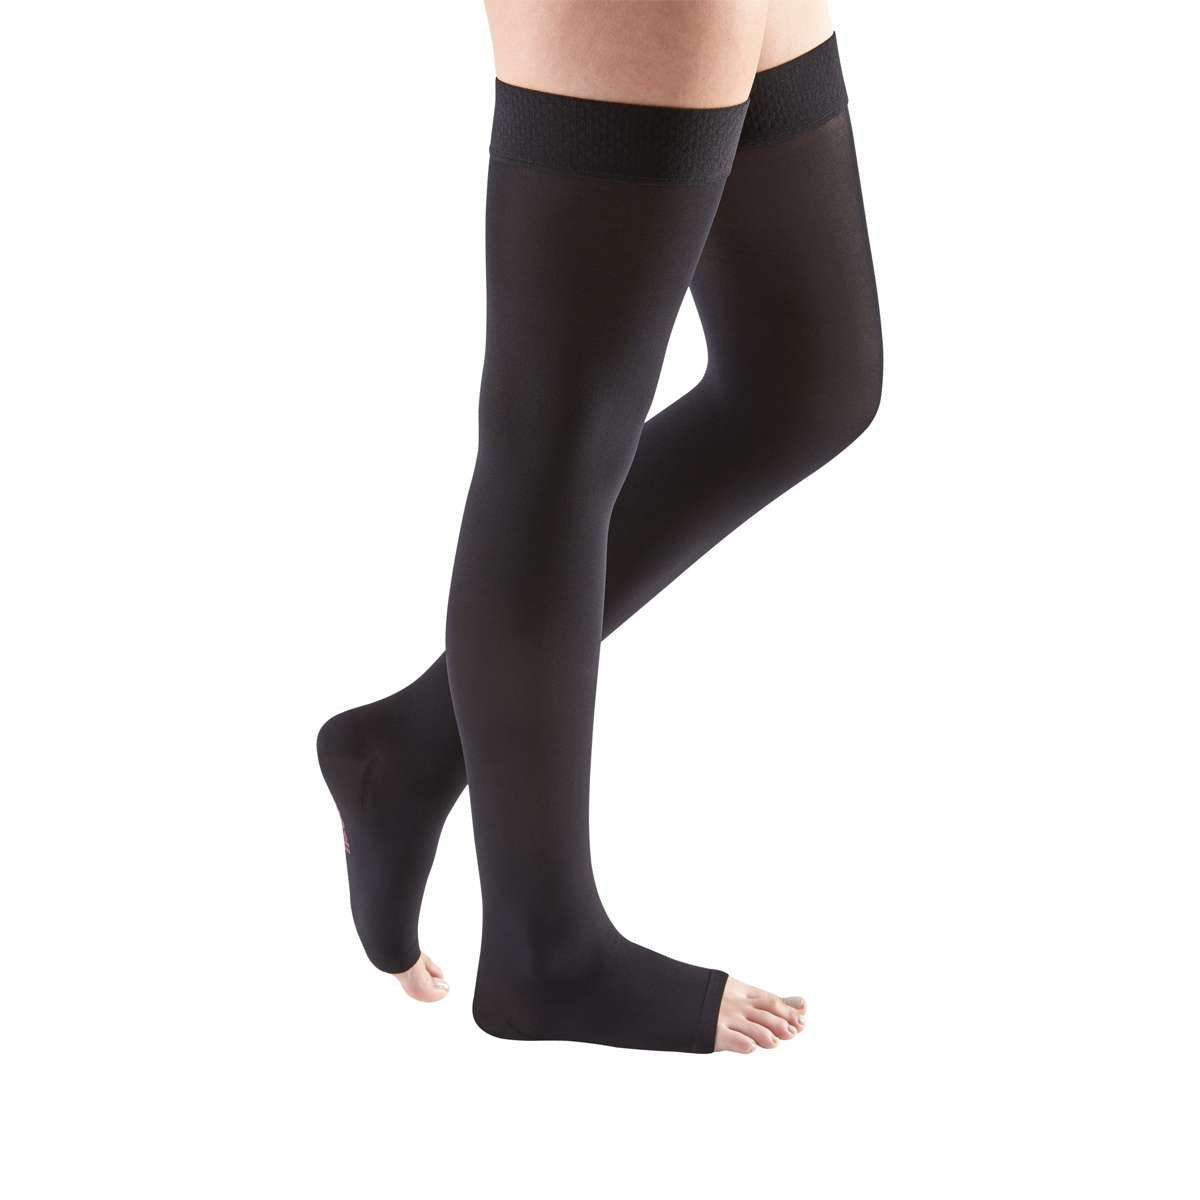 mediven comfort 30-40 mmHg Thigh High w/Beaded Silicone Topband Open Toe Compression Stockings